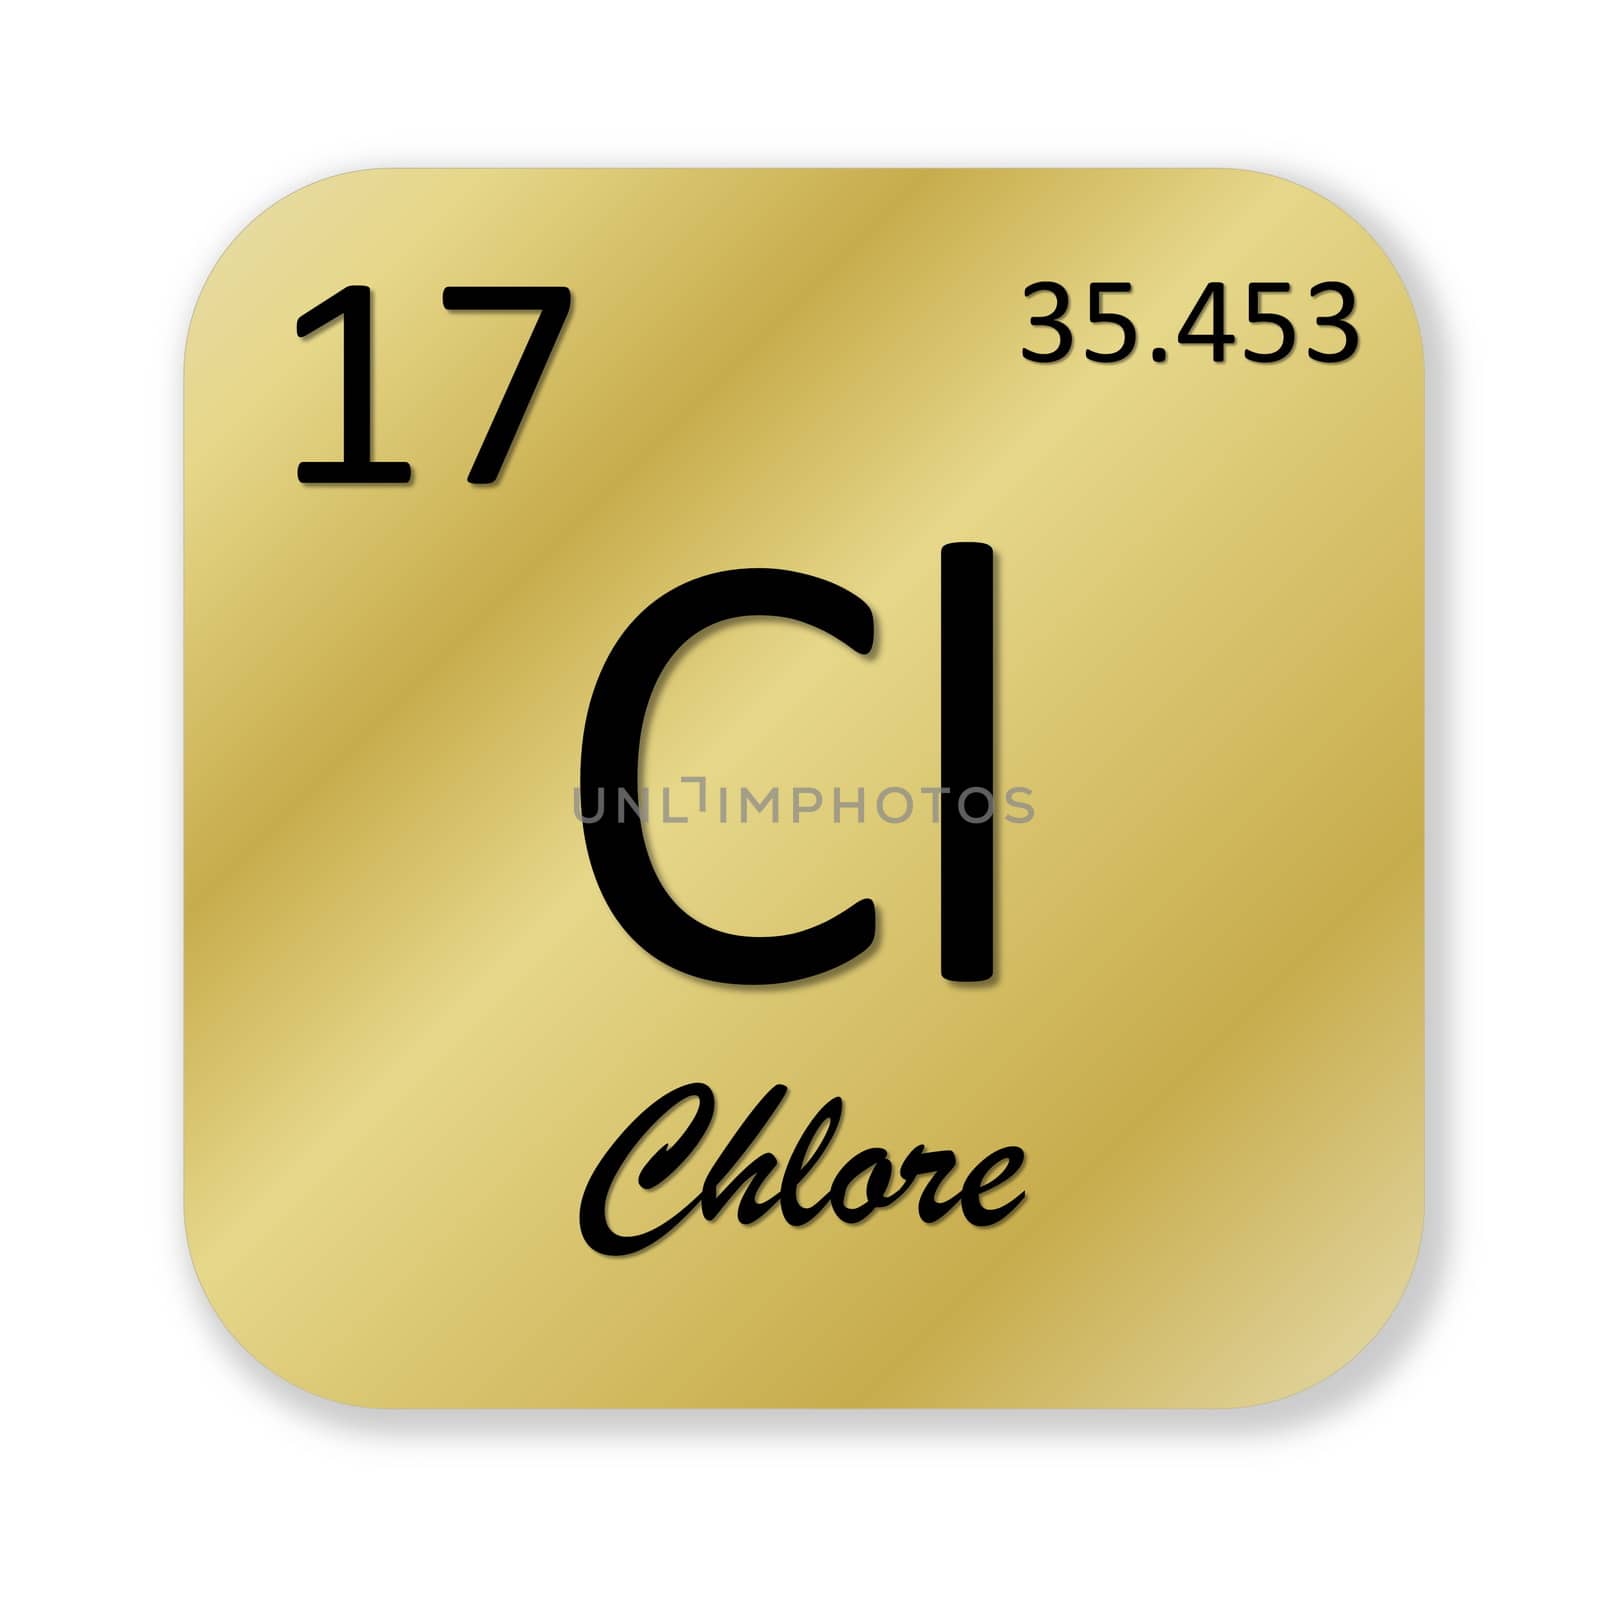 Chlorine element, french chlore by Elenaphotos21